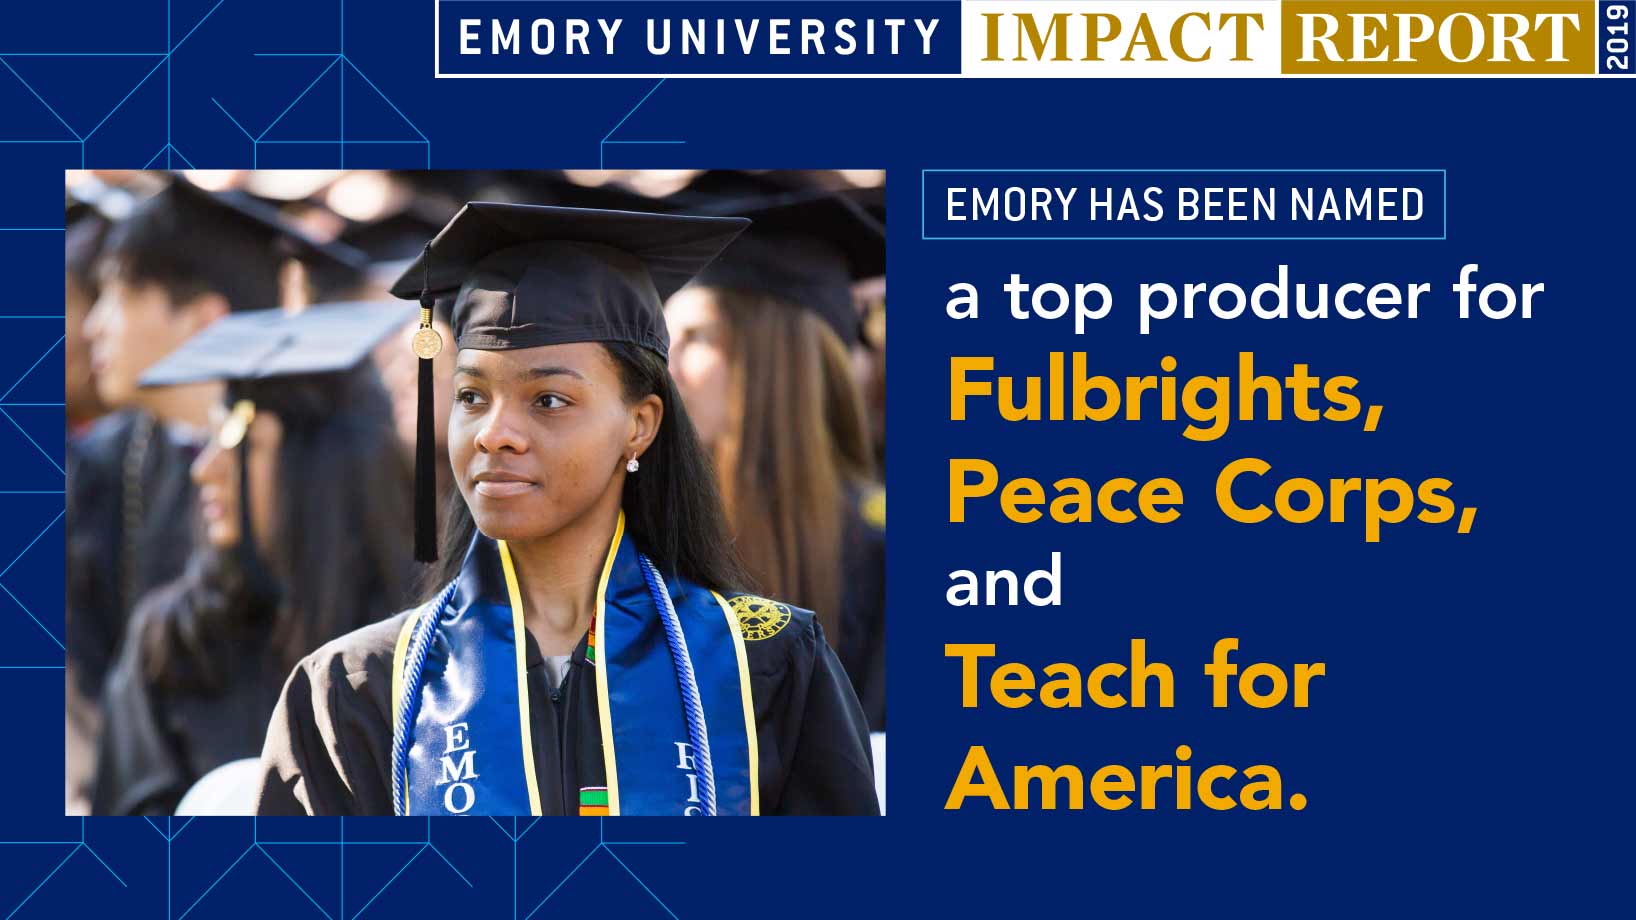 Emory has been named a top producer for Fulbrights, Peace Corps, and Teach for America.